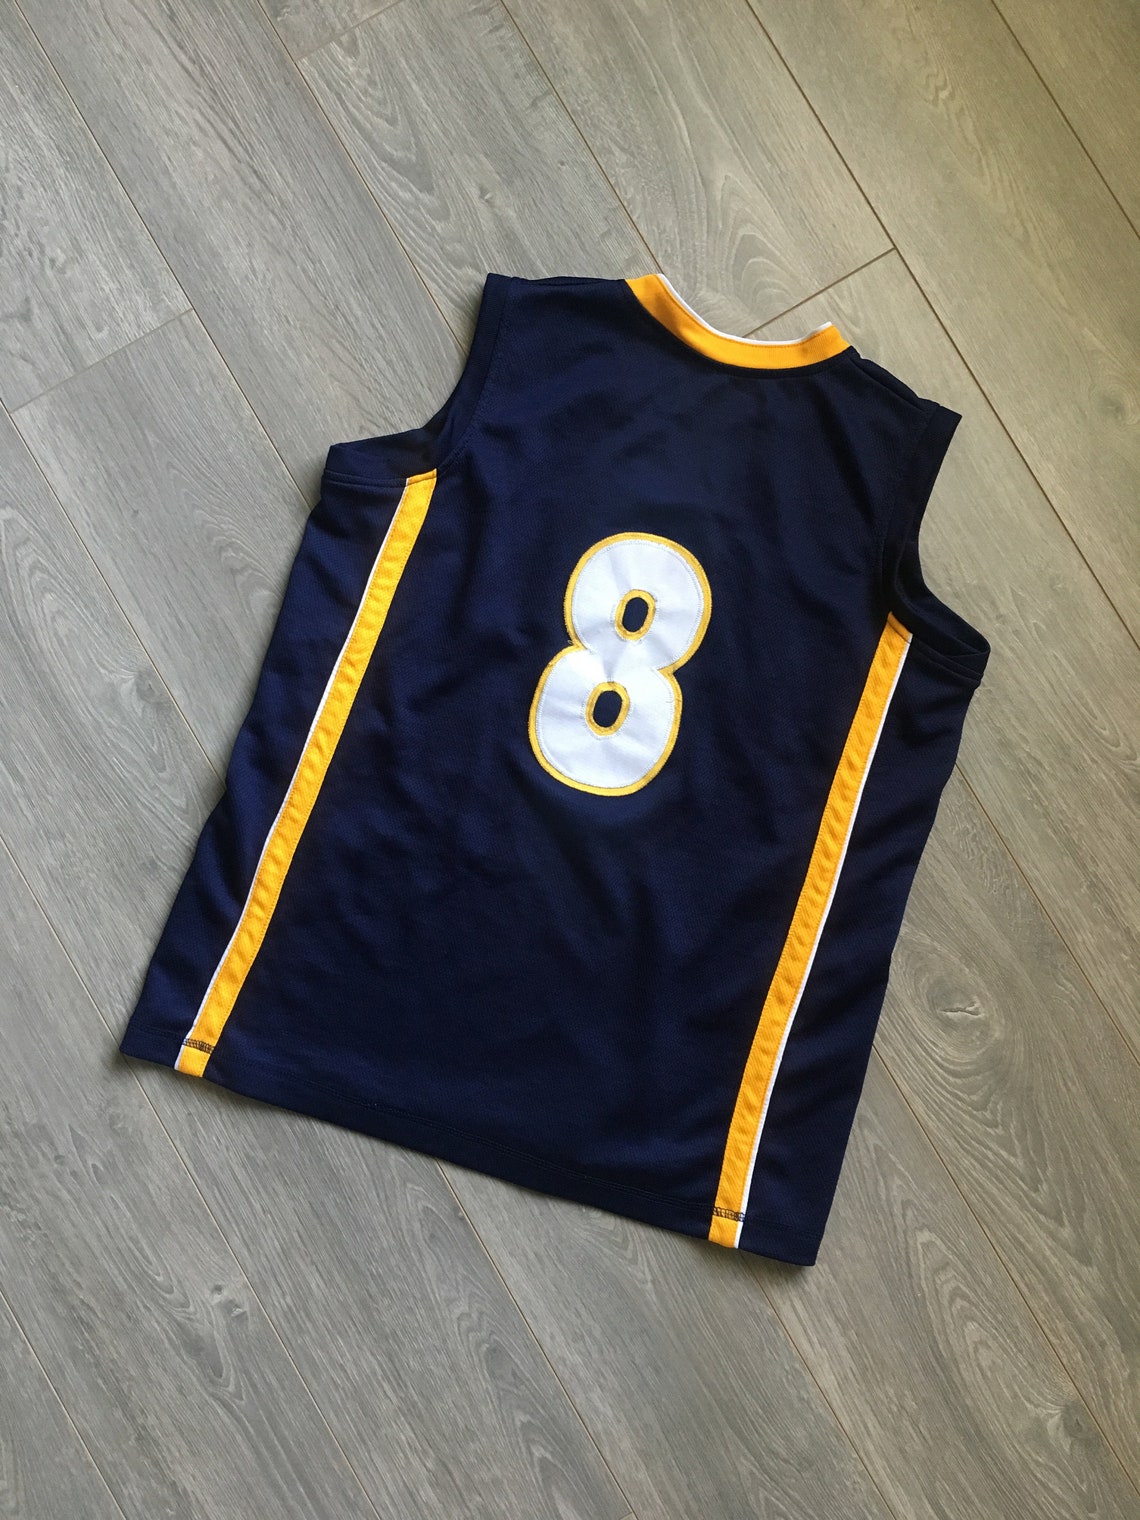 Vintage basketball jersey number 8 uptempo air navy and gold | Etsy